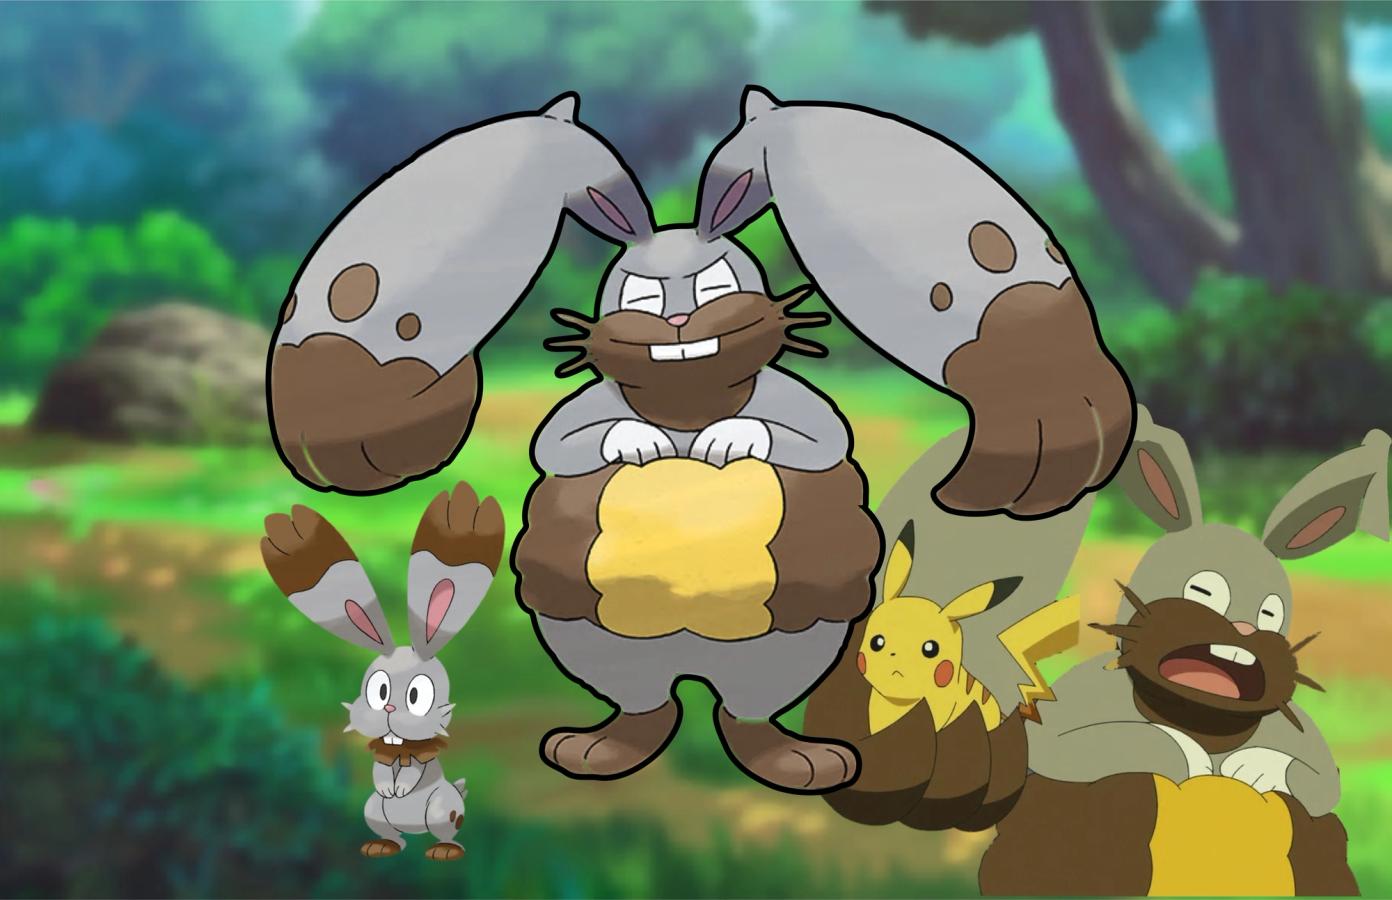 Diggersby is an ugly Pokemon